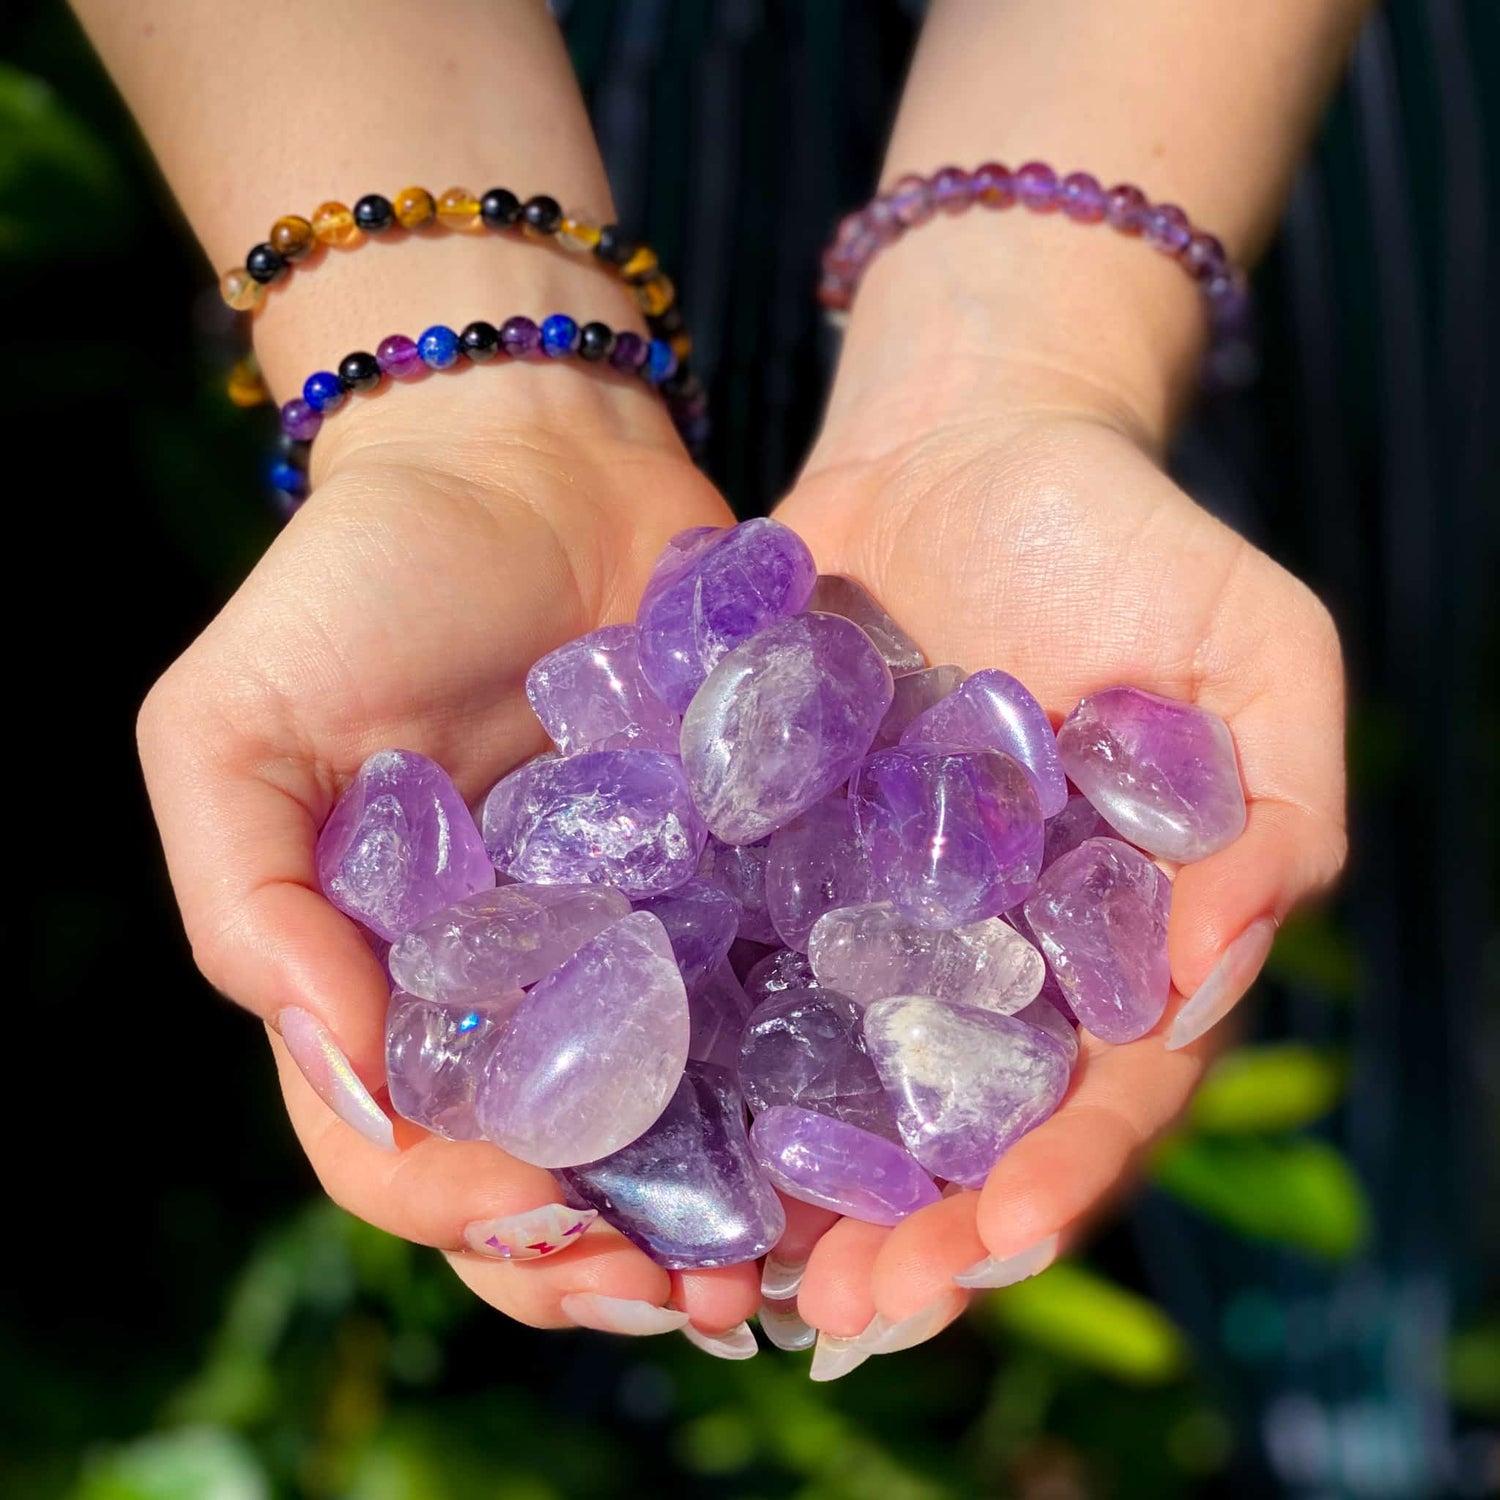 ALIGN YOUR HEALING CRYSTALS WITH AN INTENTION